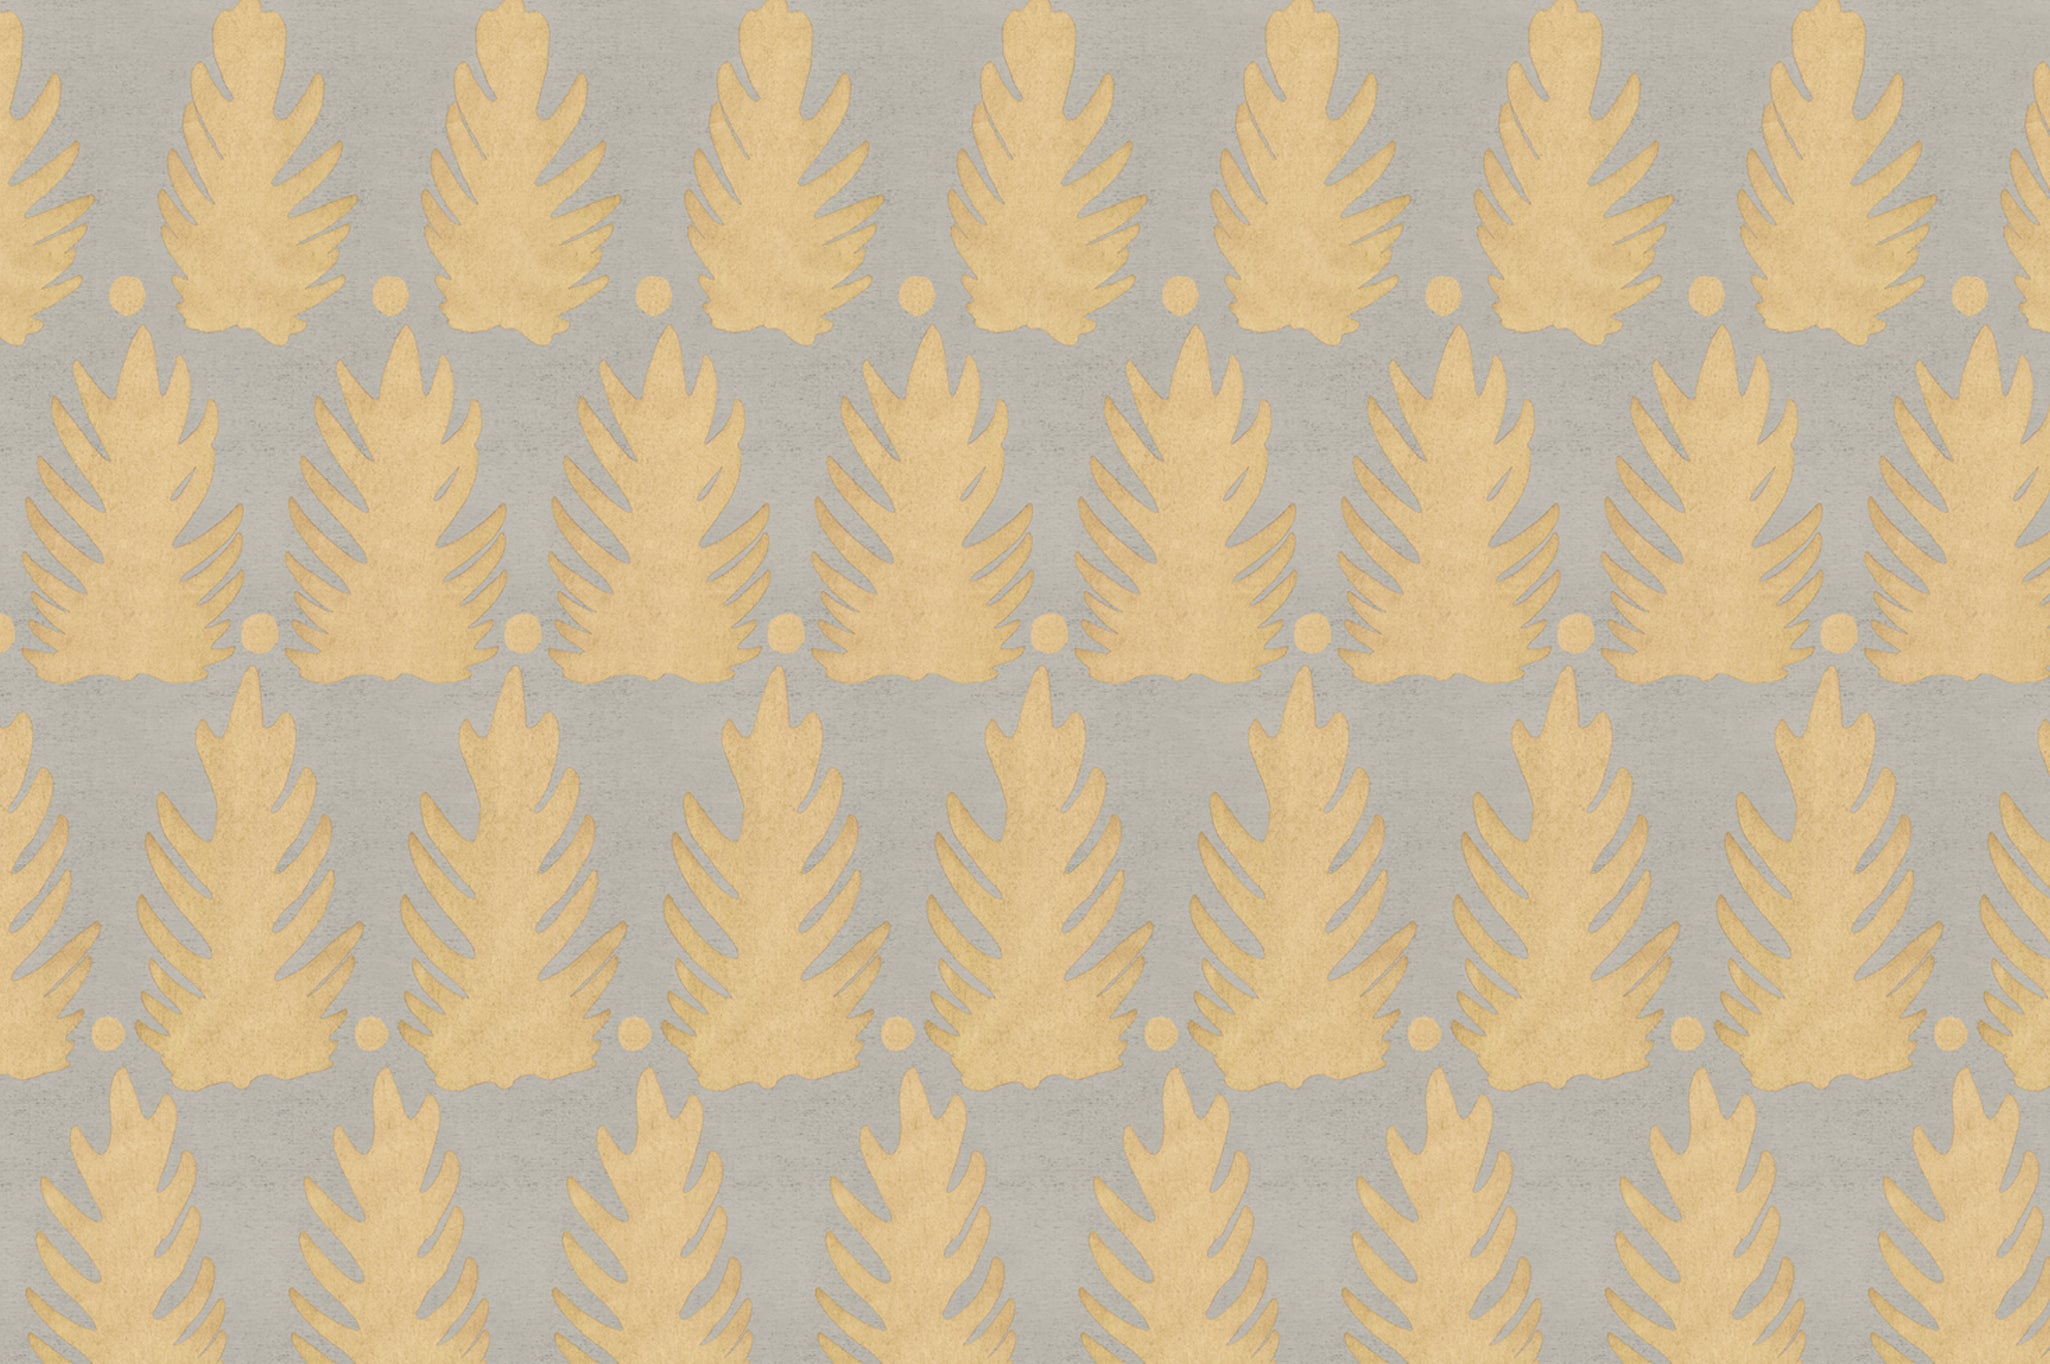 Detail of fabric in a linear leaf print in gold on a light gray field.